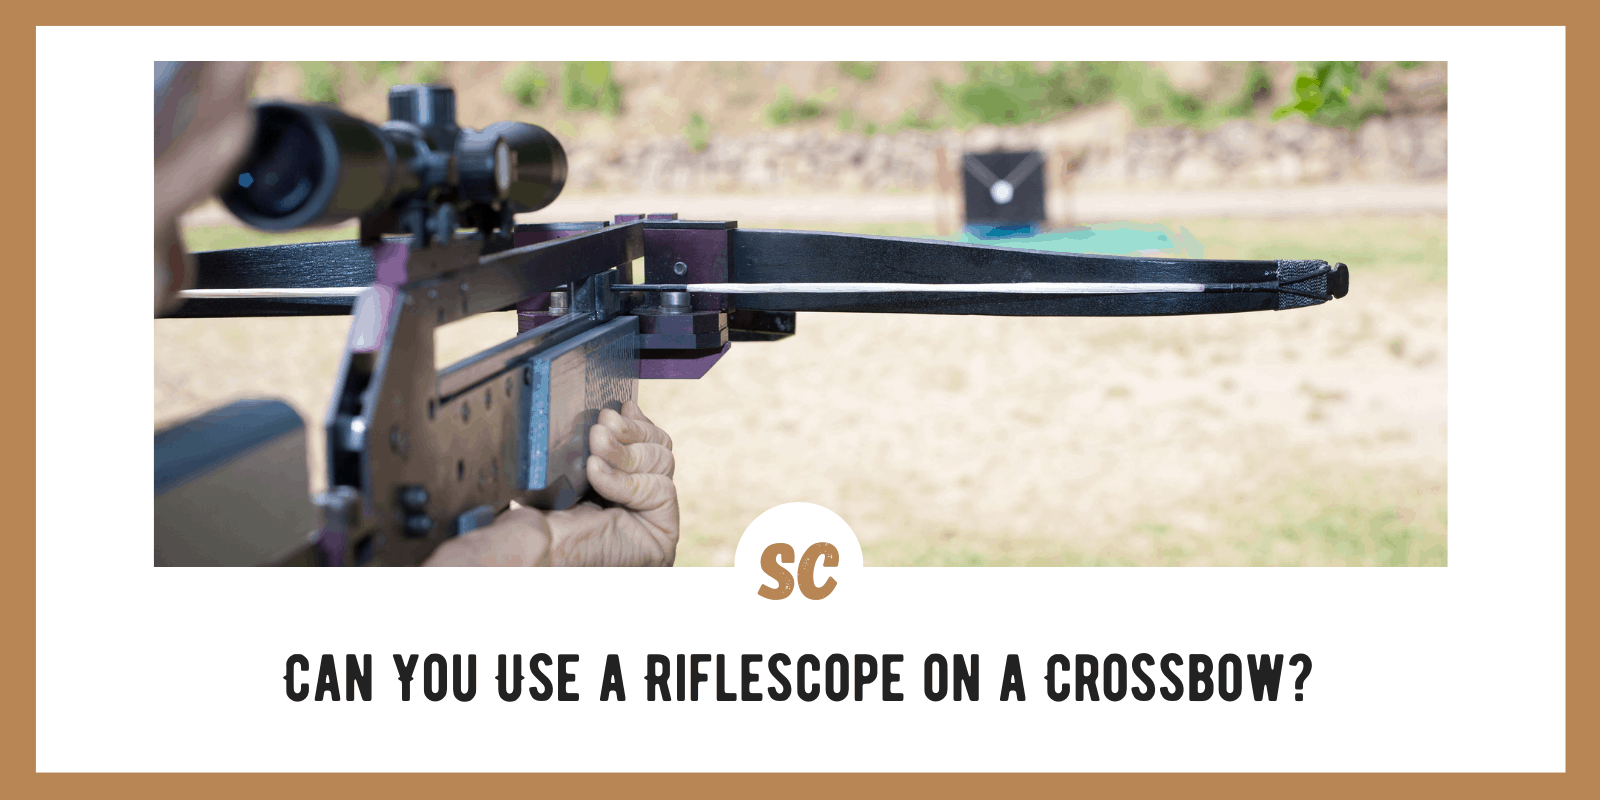 Can You Use a Riflescope on a Crossbow?